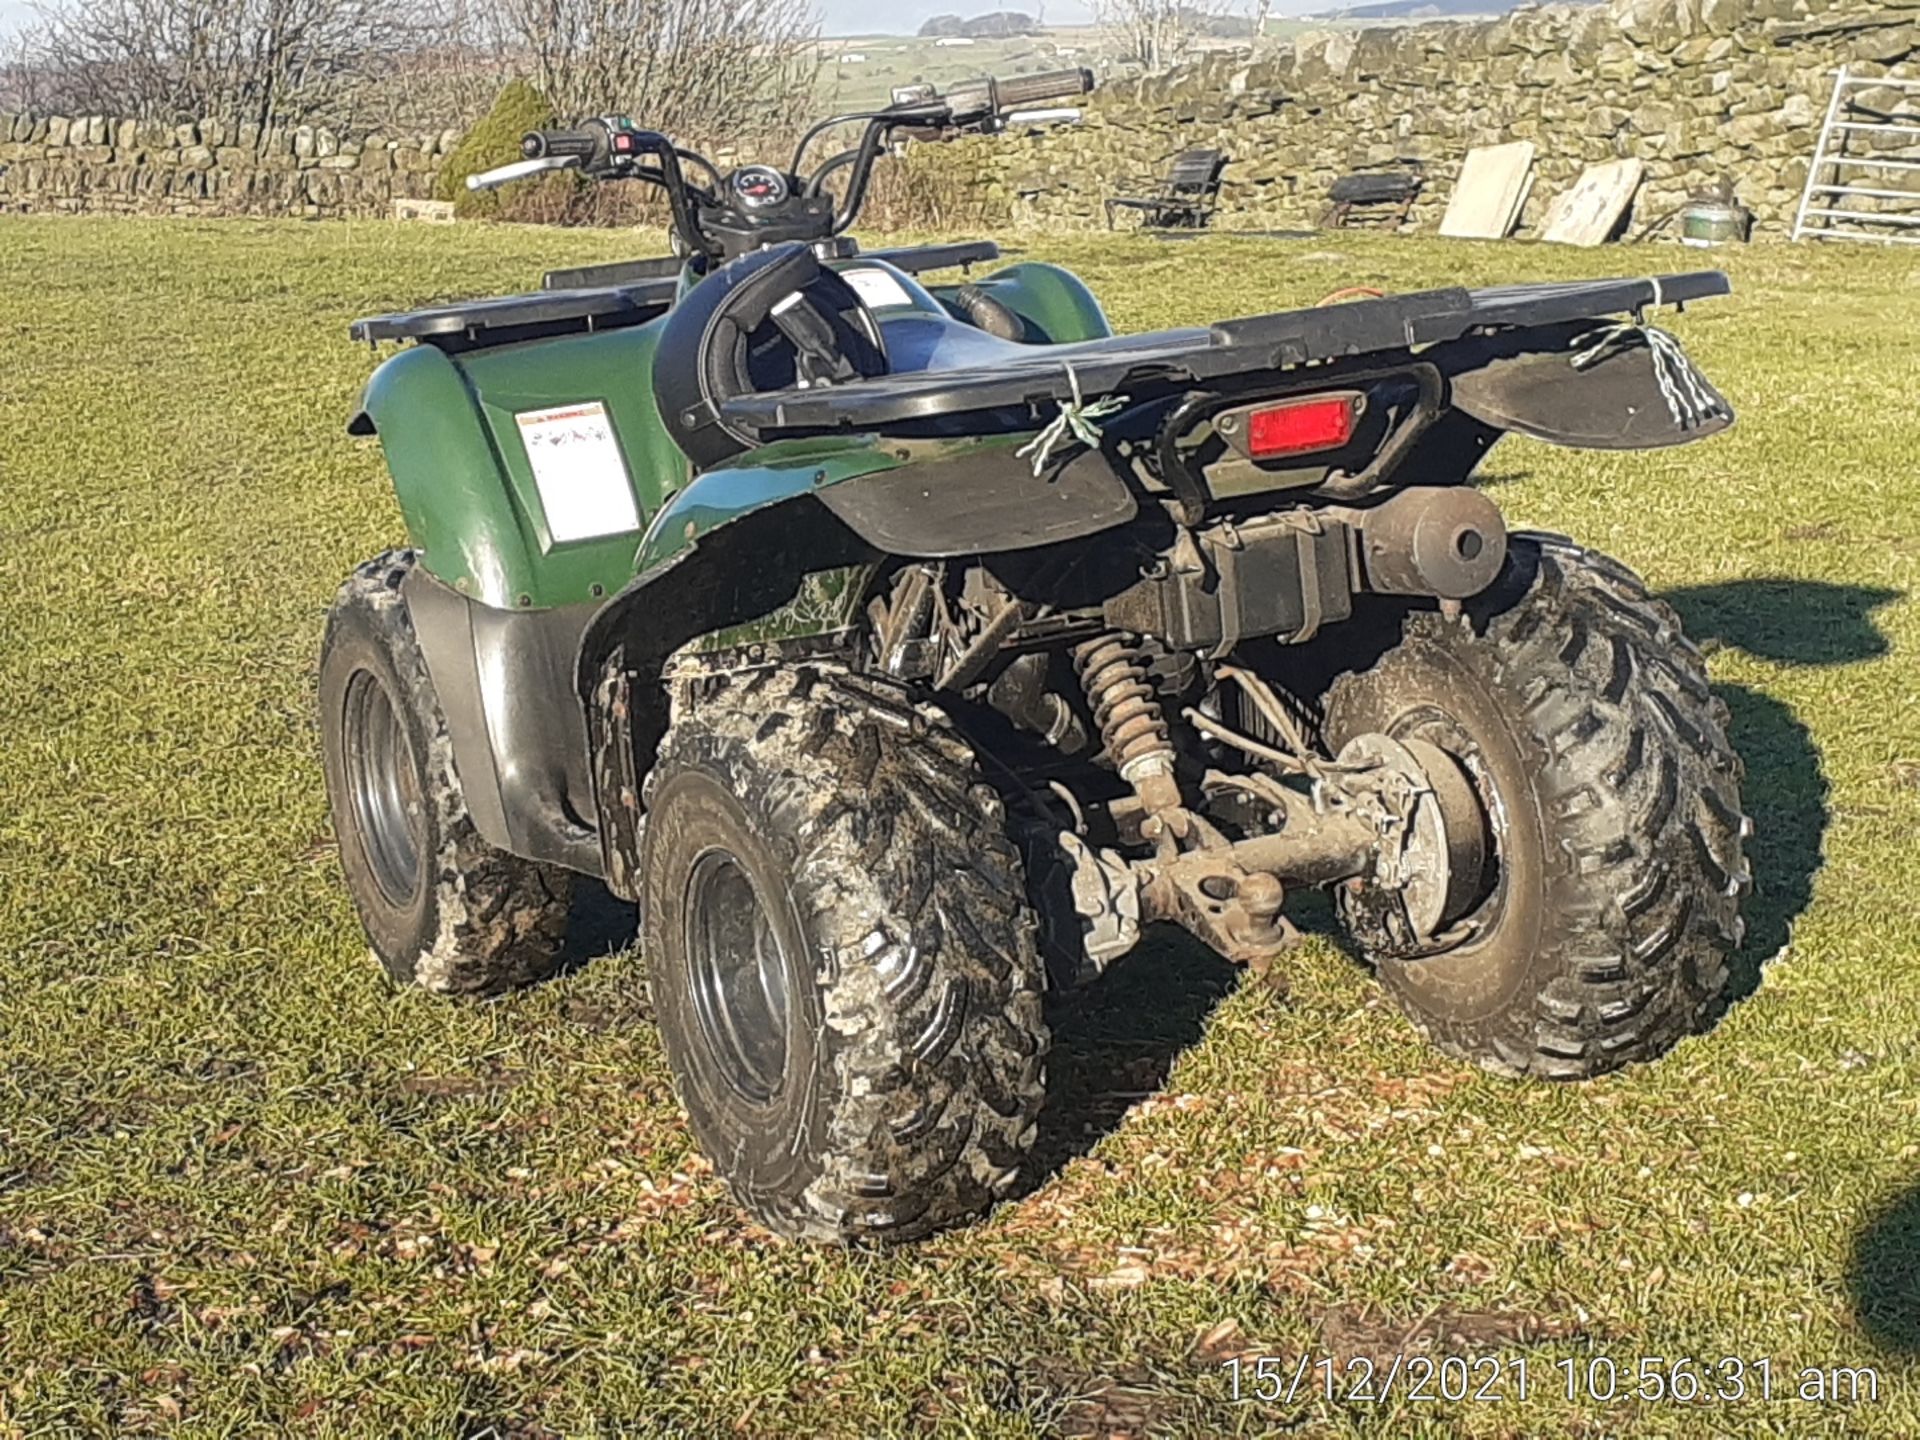 KAWASAKI PRAIRIE 300 4x4 QUAD BIKE, TOW BALL HITCH, FULL TIME 4WD, 1 OWNER FROM NEW *NO VAT* - Image 4 of 7